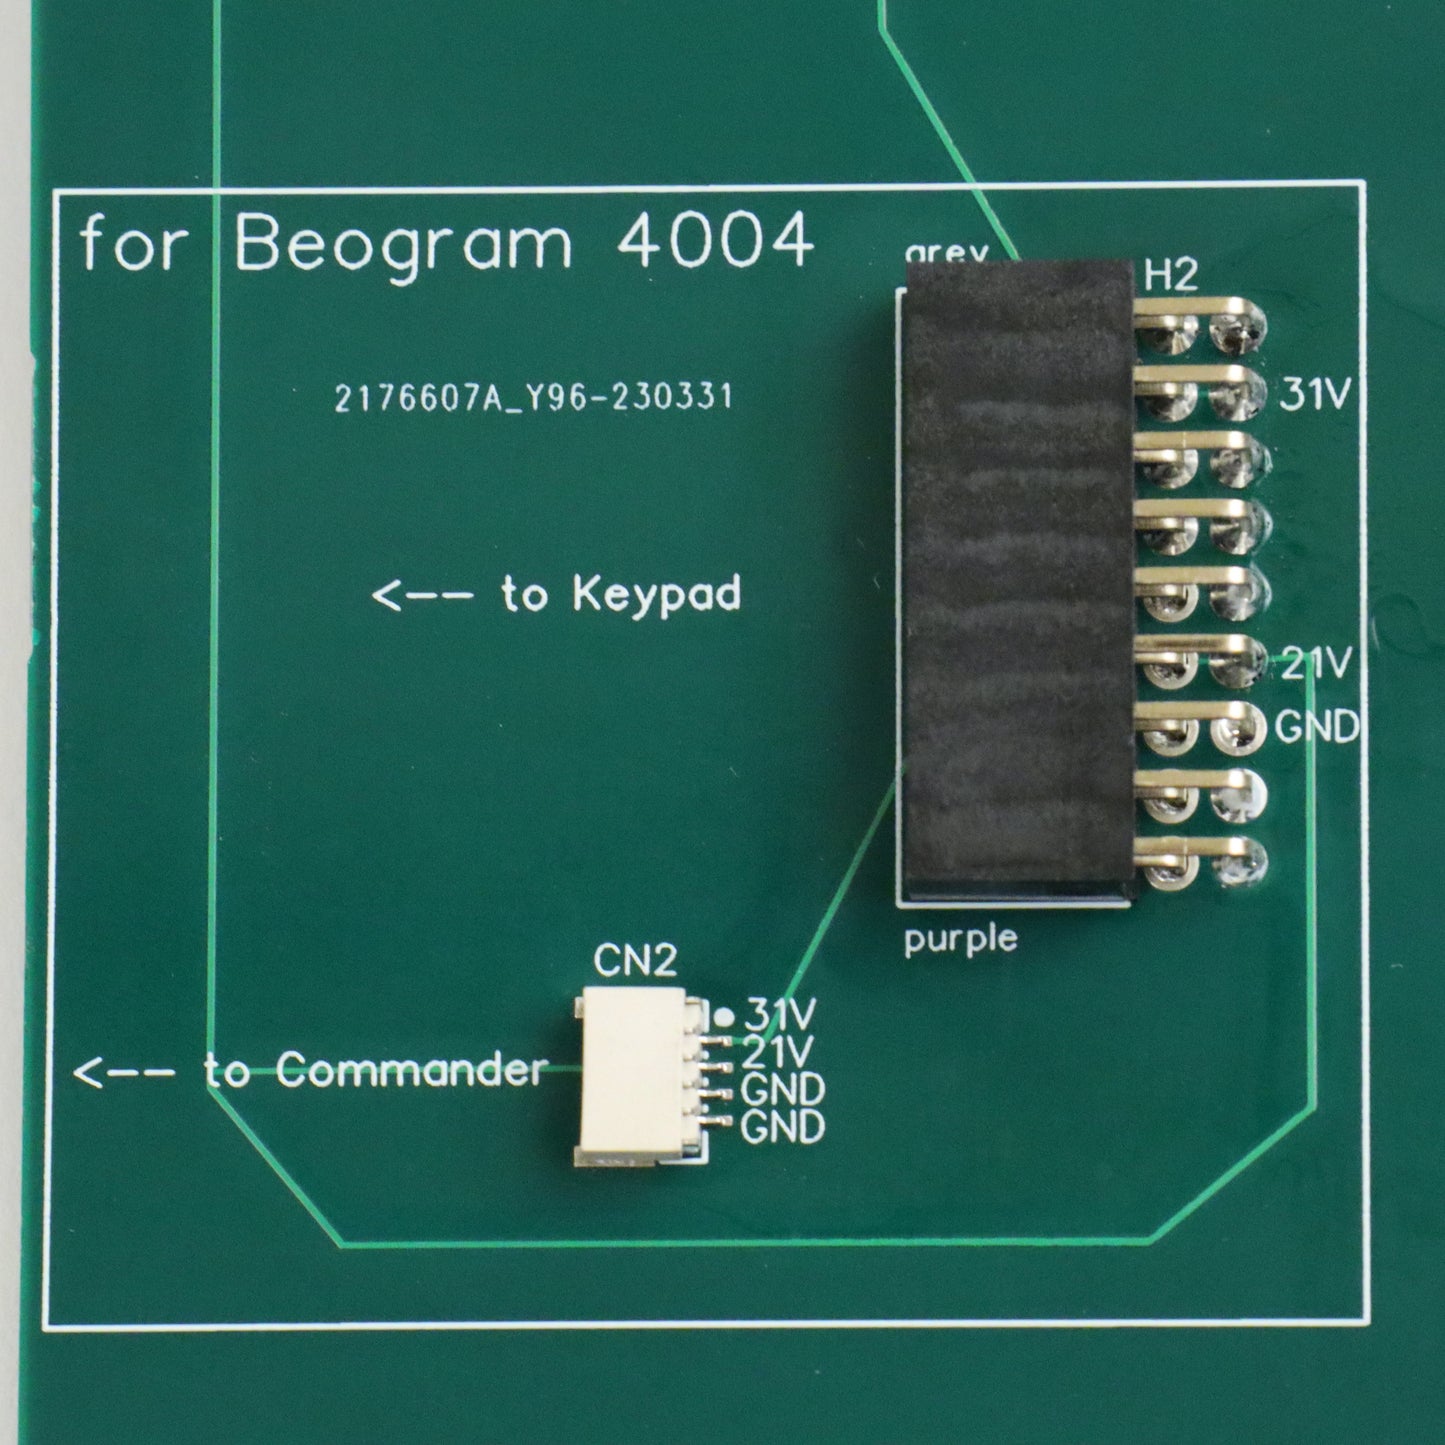 Internal RIAA Pre-Amplifier for Beogram 4002 and 4004